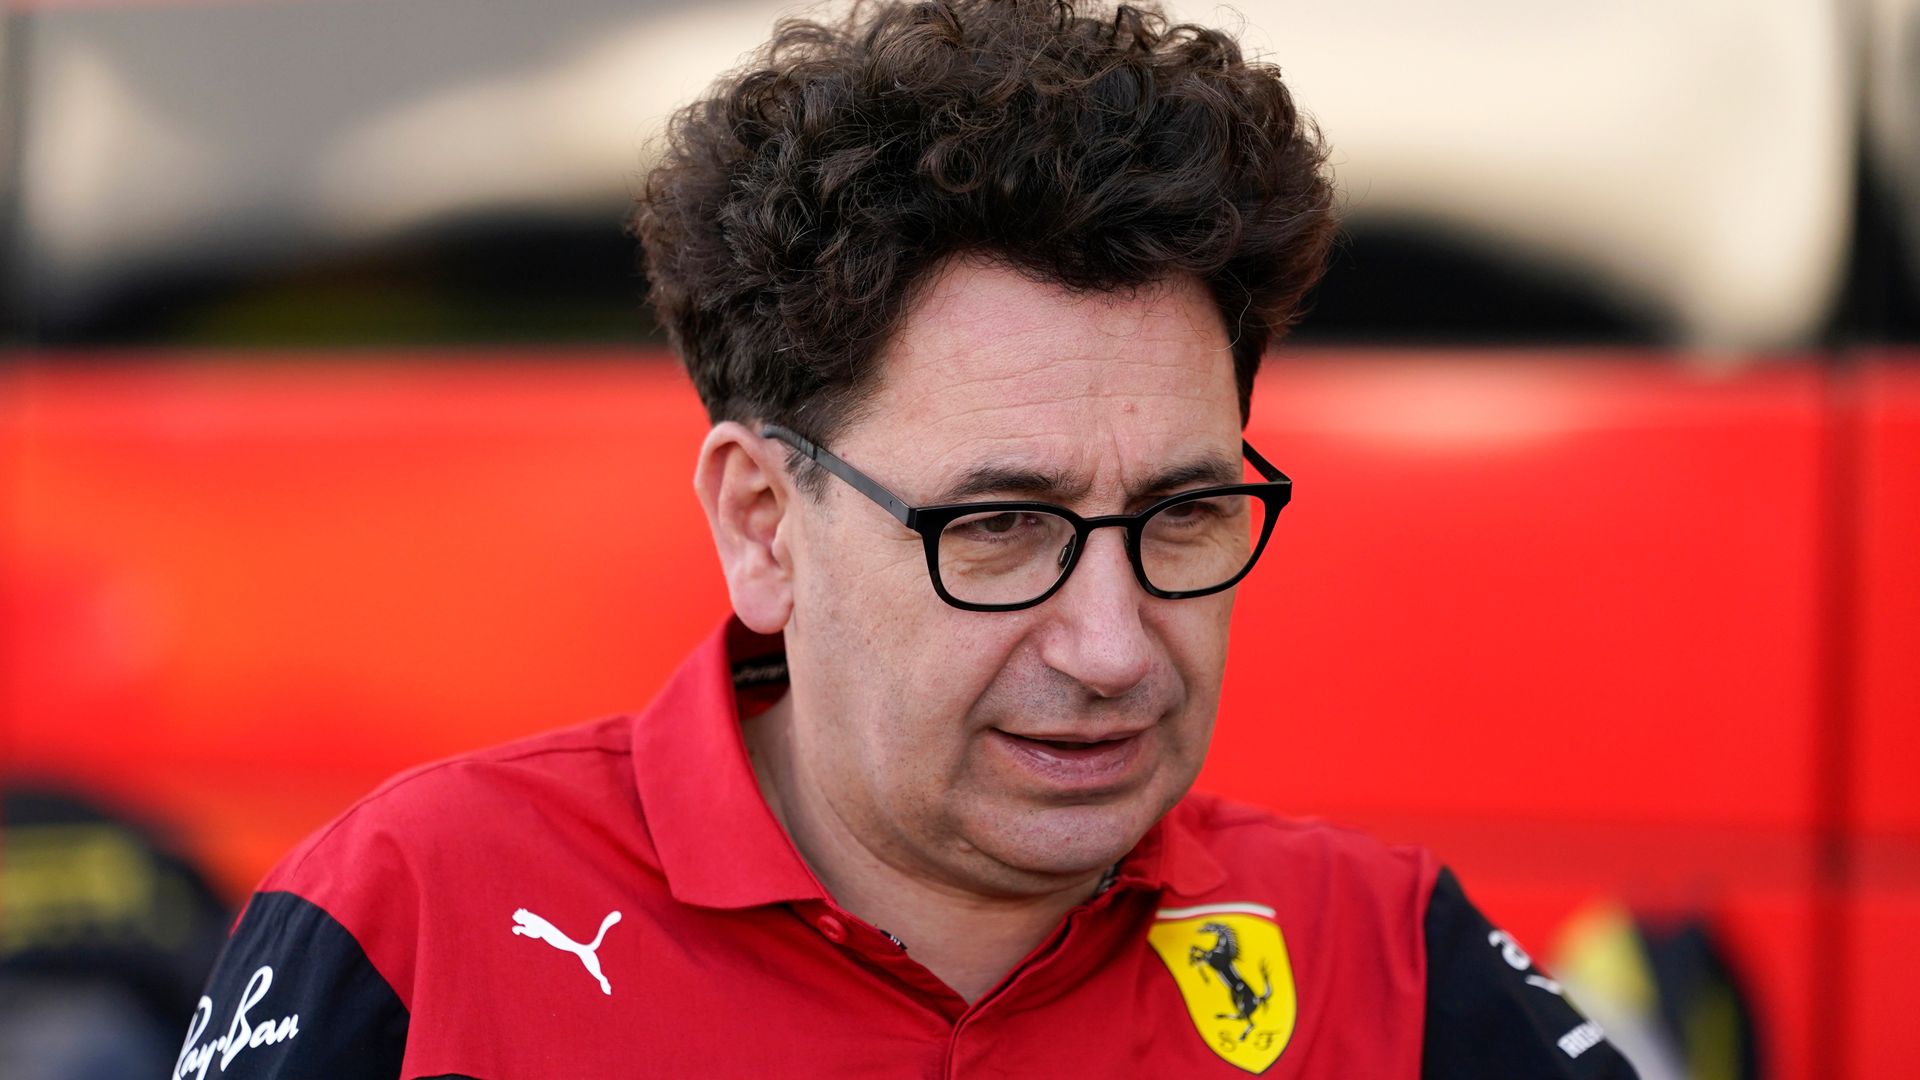 Ferrari: Binotto sacking experiences ‘completely with out basis’SkySports | Information